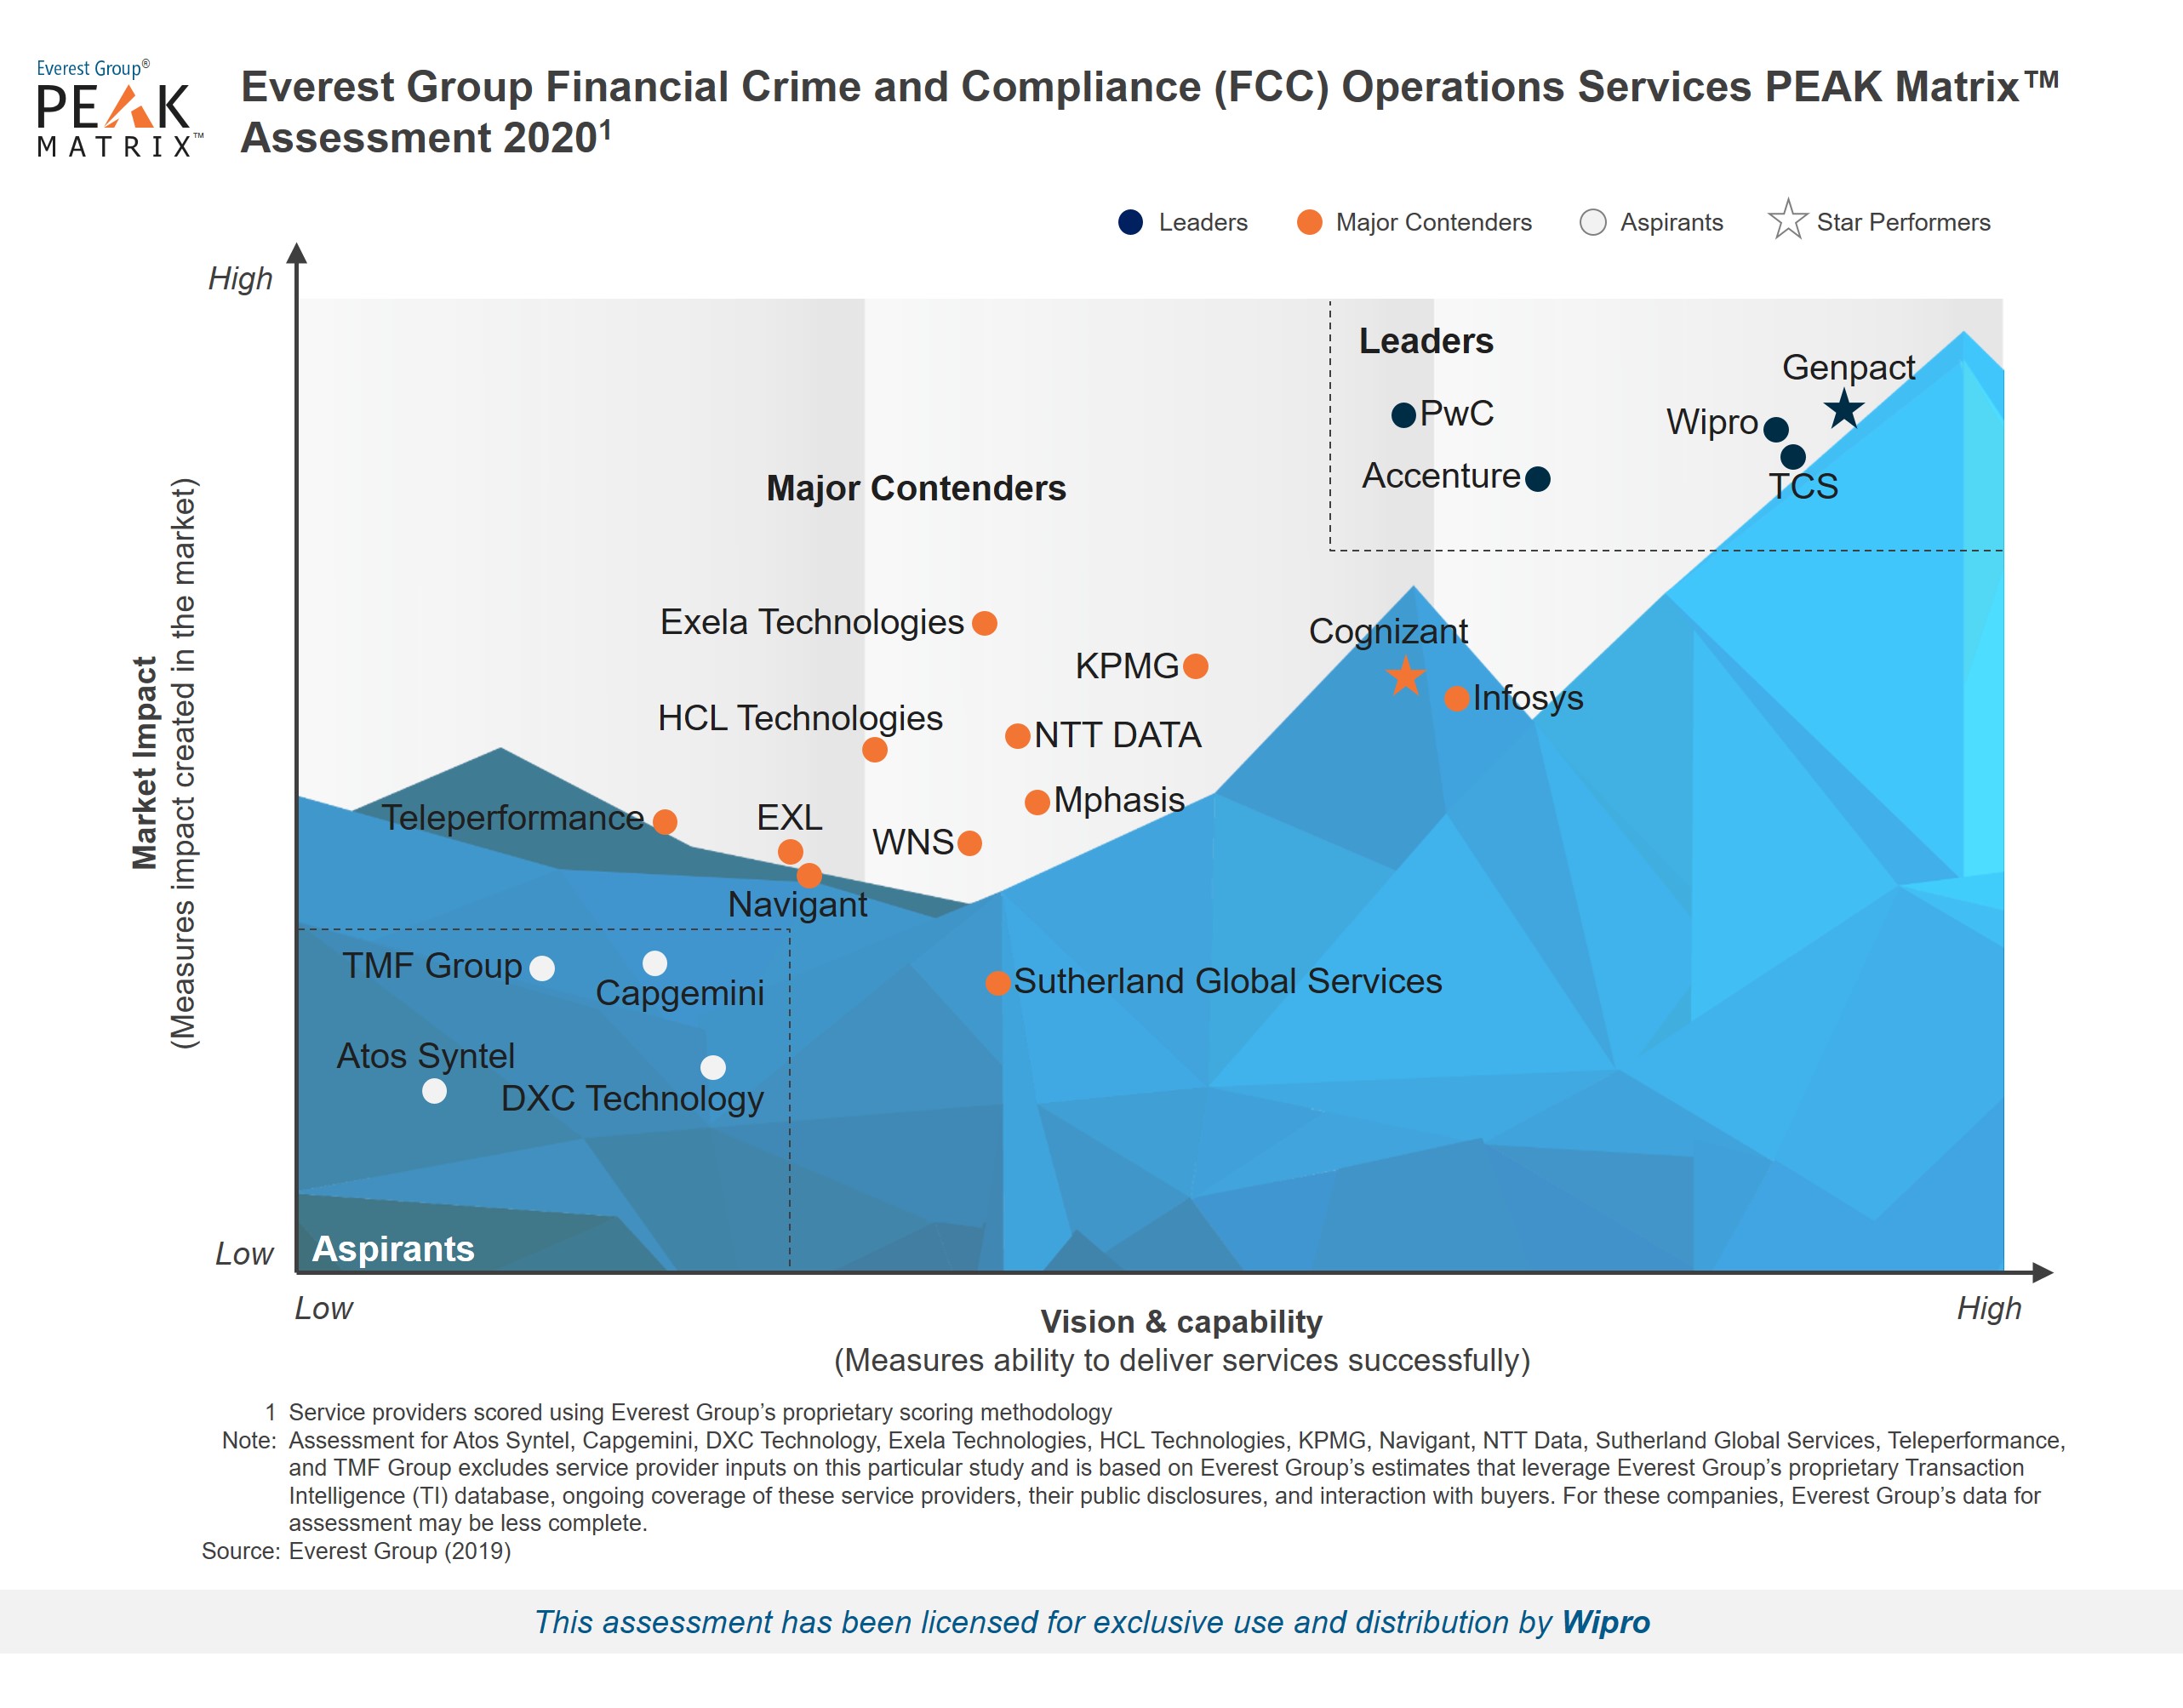 Wipro recognized as a Leader in Everest Group's Financial Crime and Compliance (FCC) Operations Services PEAK Matrix Assessment and Service Provider Landscape 2020